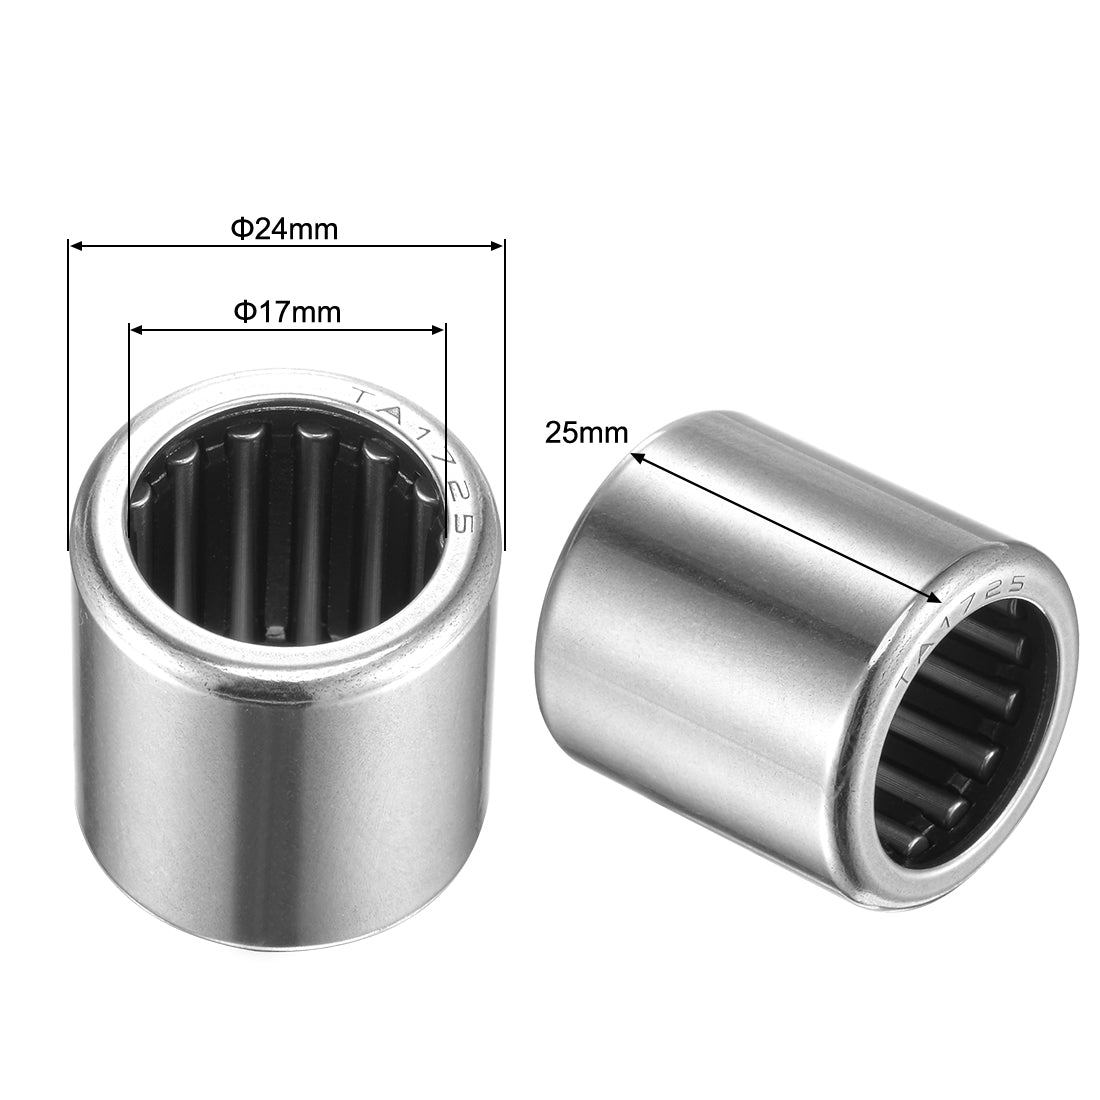 uxcell Uxcell TA1725 Needle Roller Bearings 17mm x 24mm x 25mm Chrome Steel Open End 2pcs